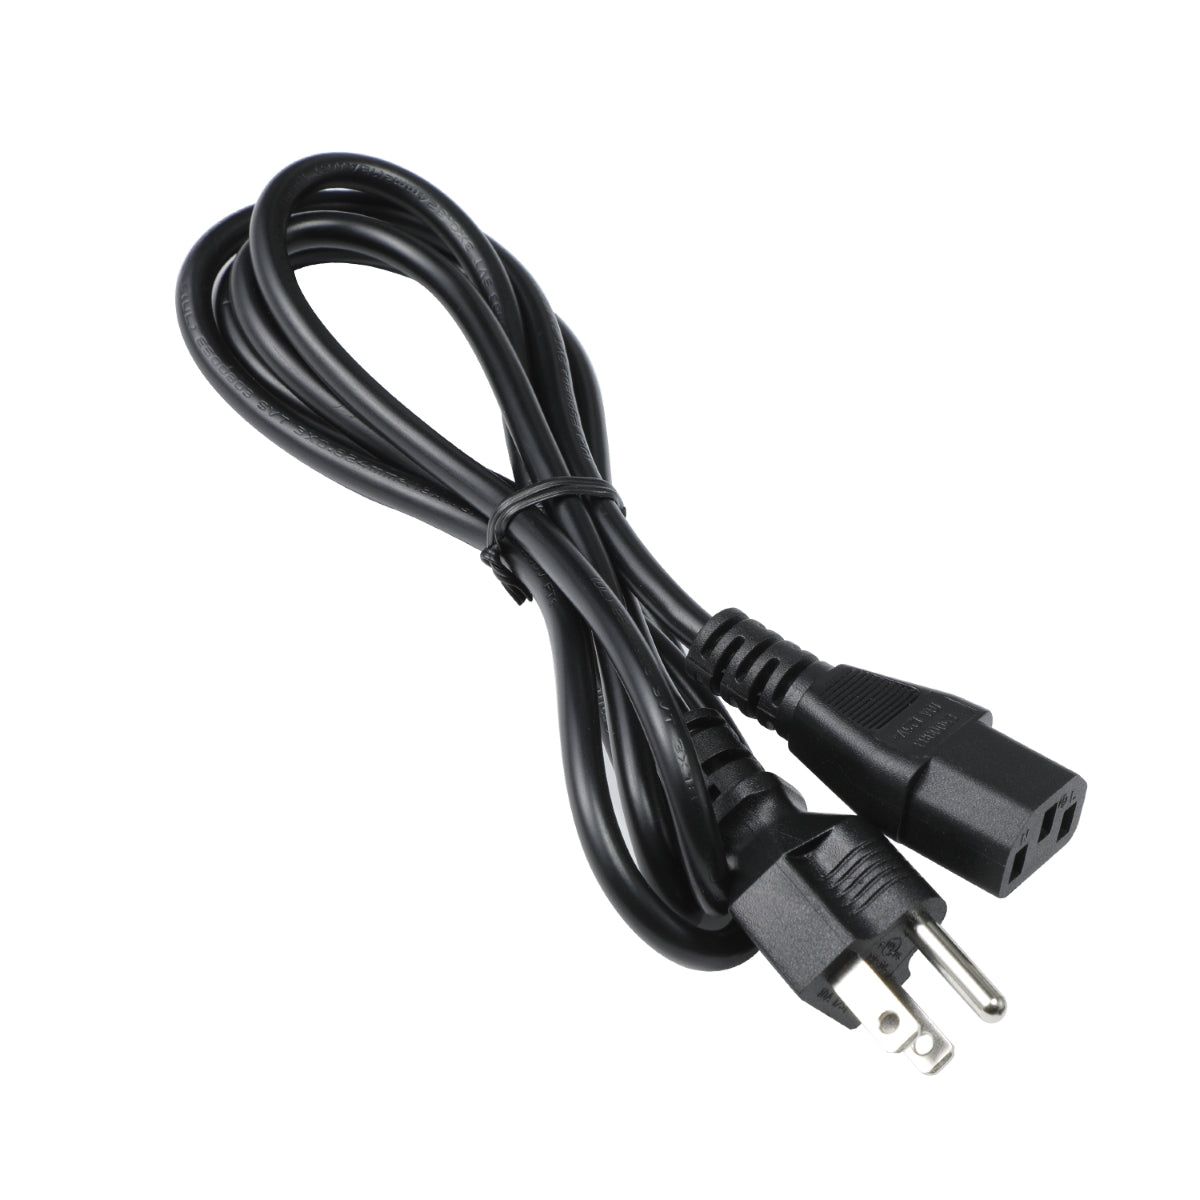 Power Cord for Acer P216HL 21.5-Inch Monitor.